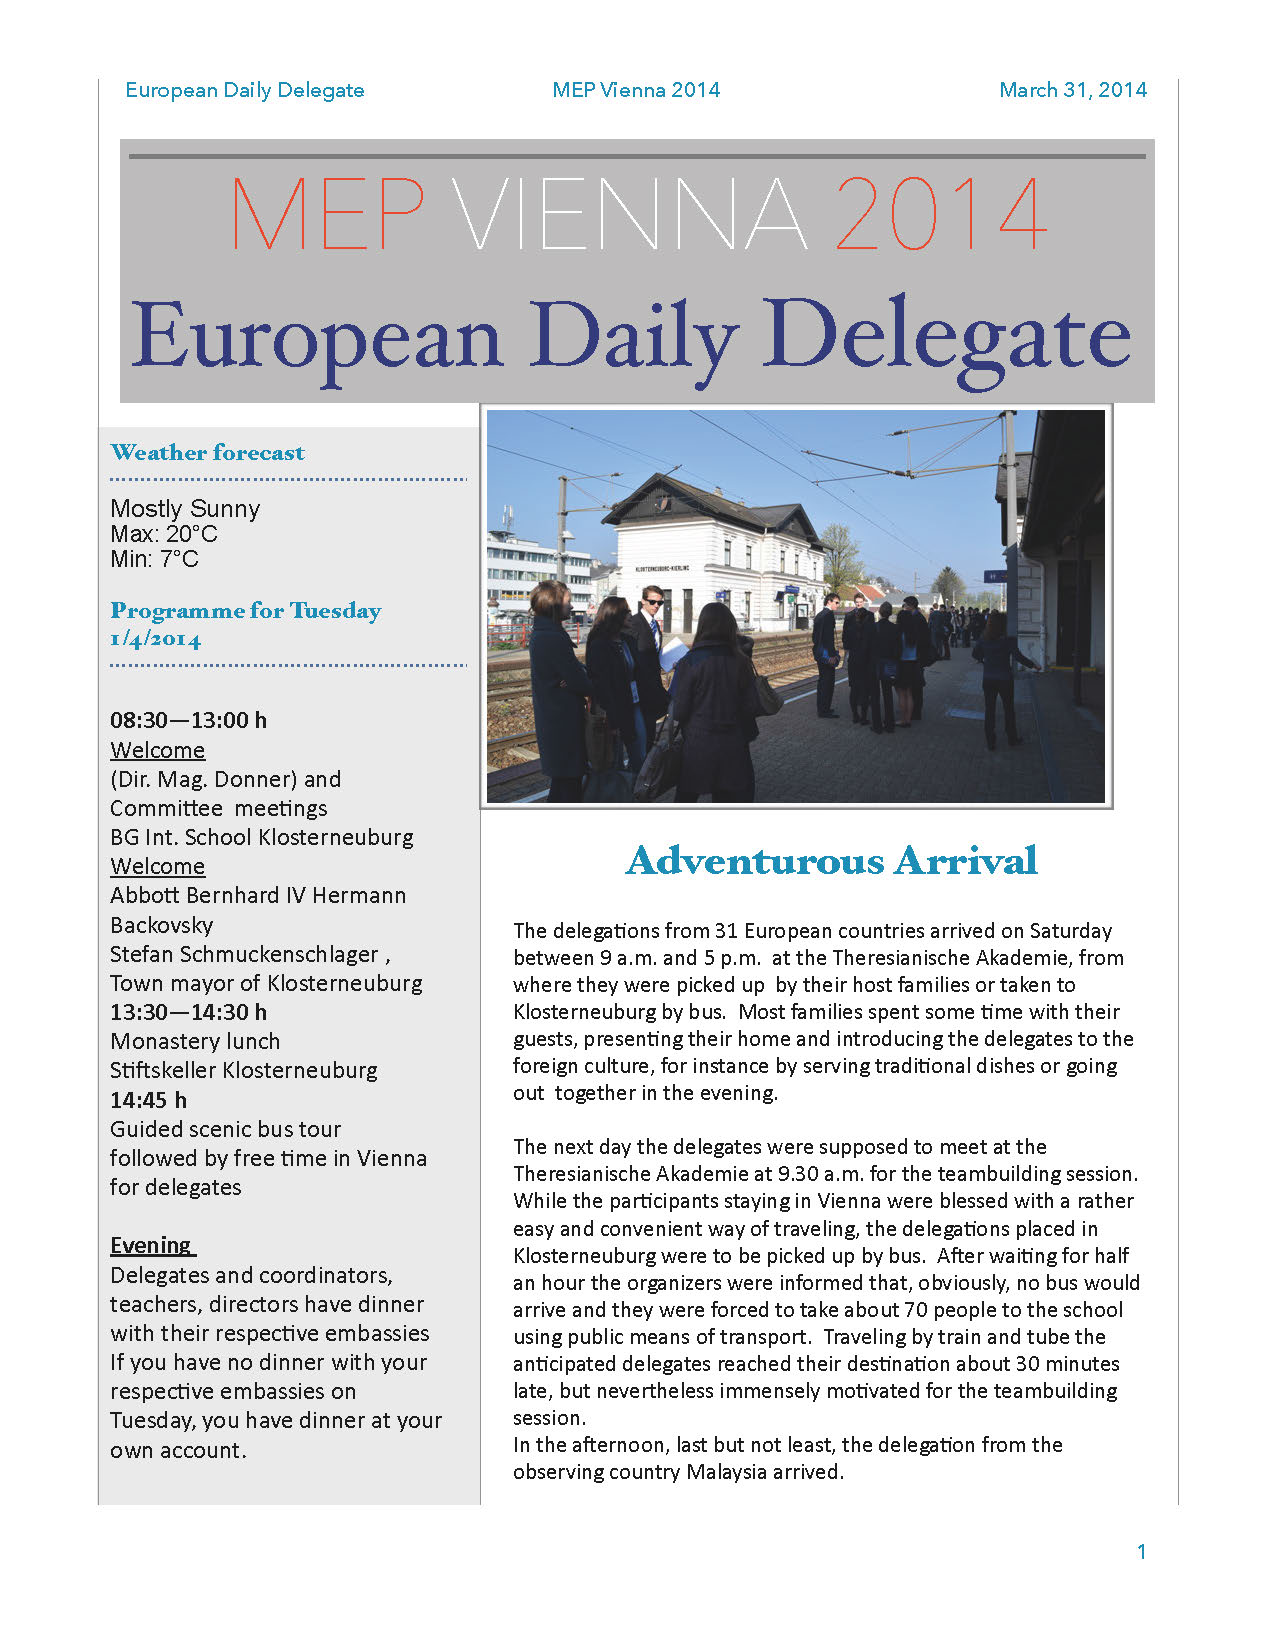 The European Daily Delegate (Issue 1)